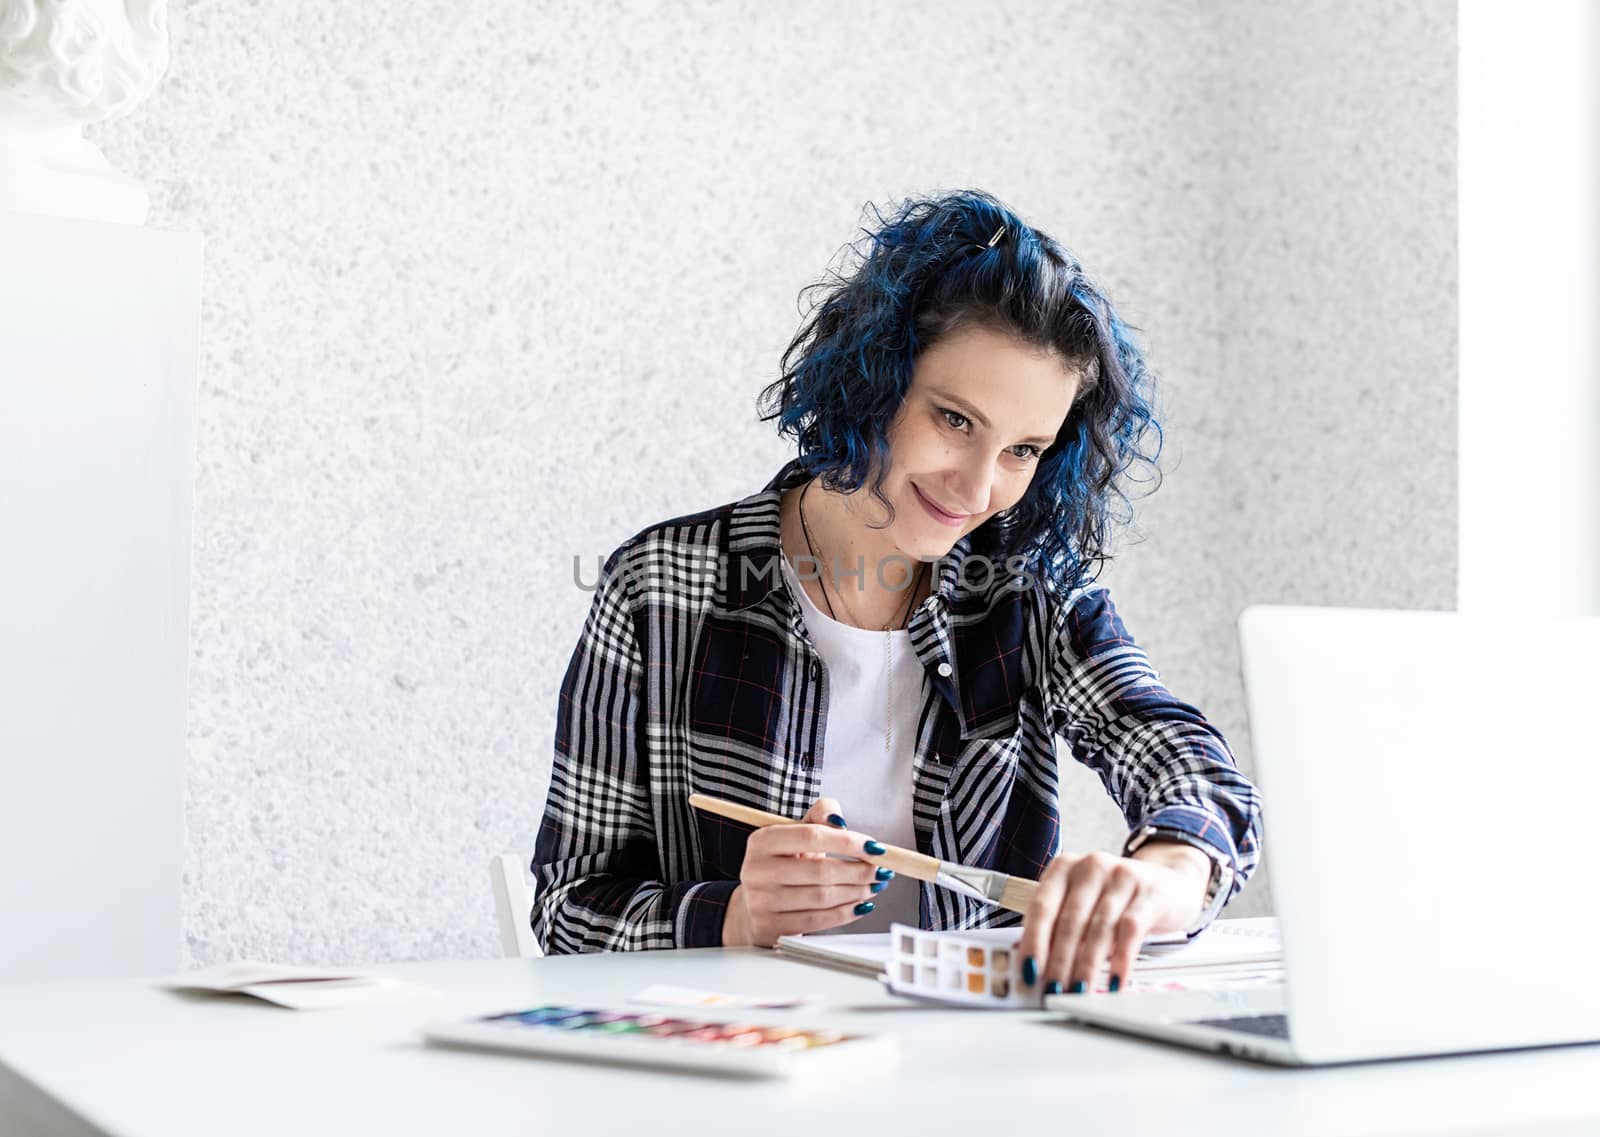 Designer working with colour palettes and laptop in her art studio